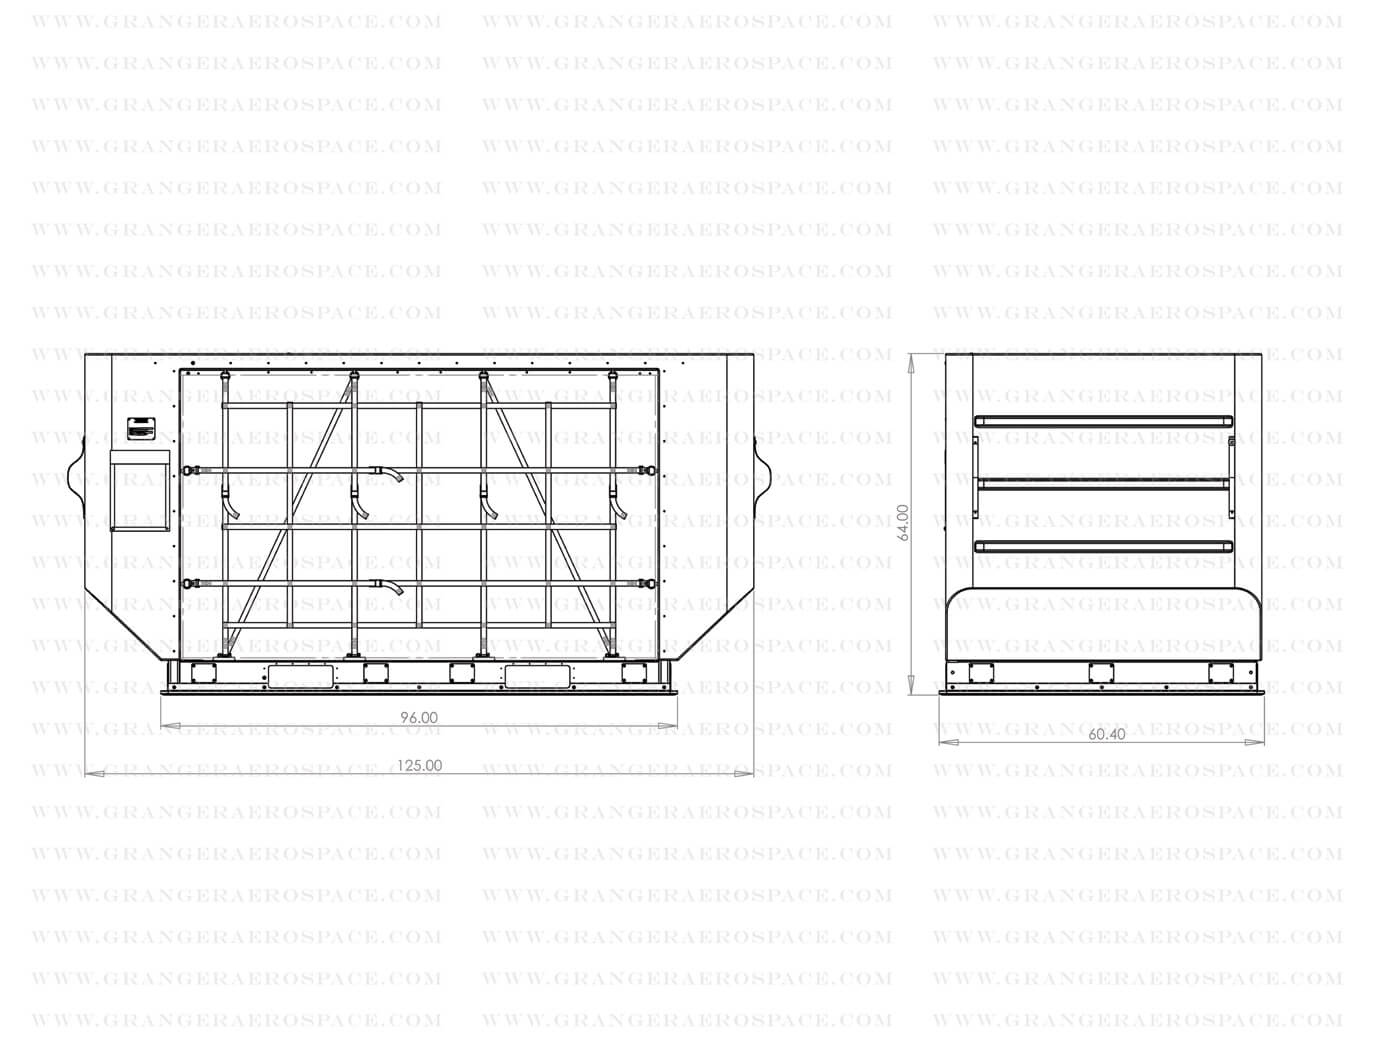 LD 8 Dimensions, LD 8 Air Cargo Container Dimensions, DQN dimensions